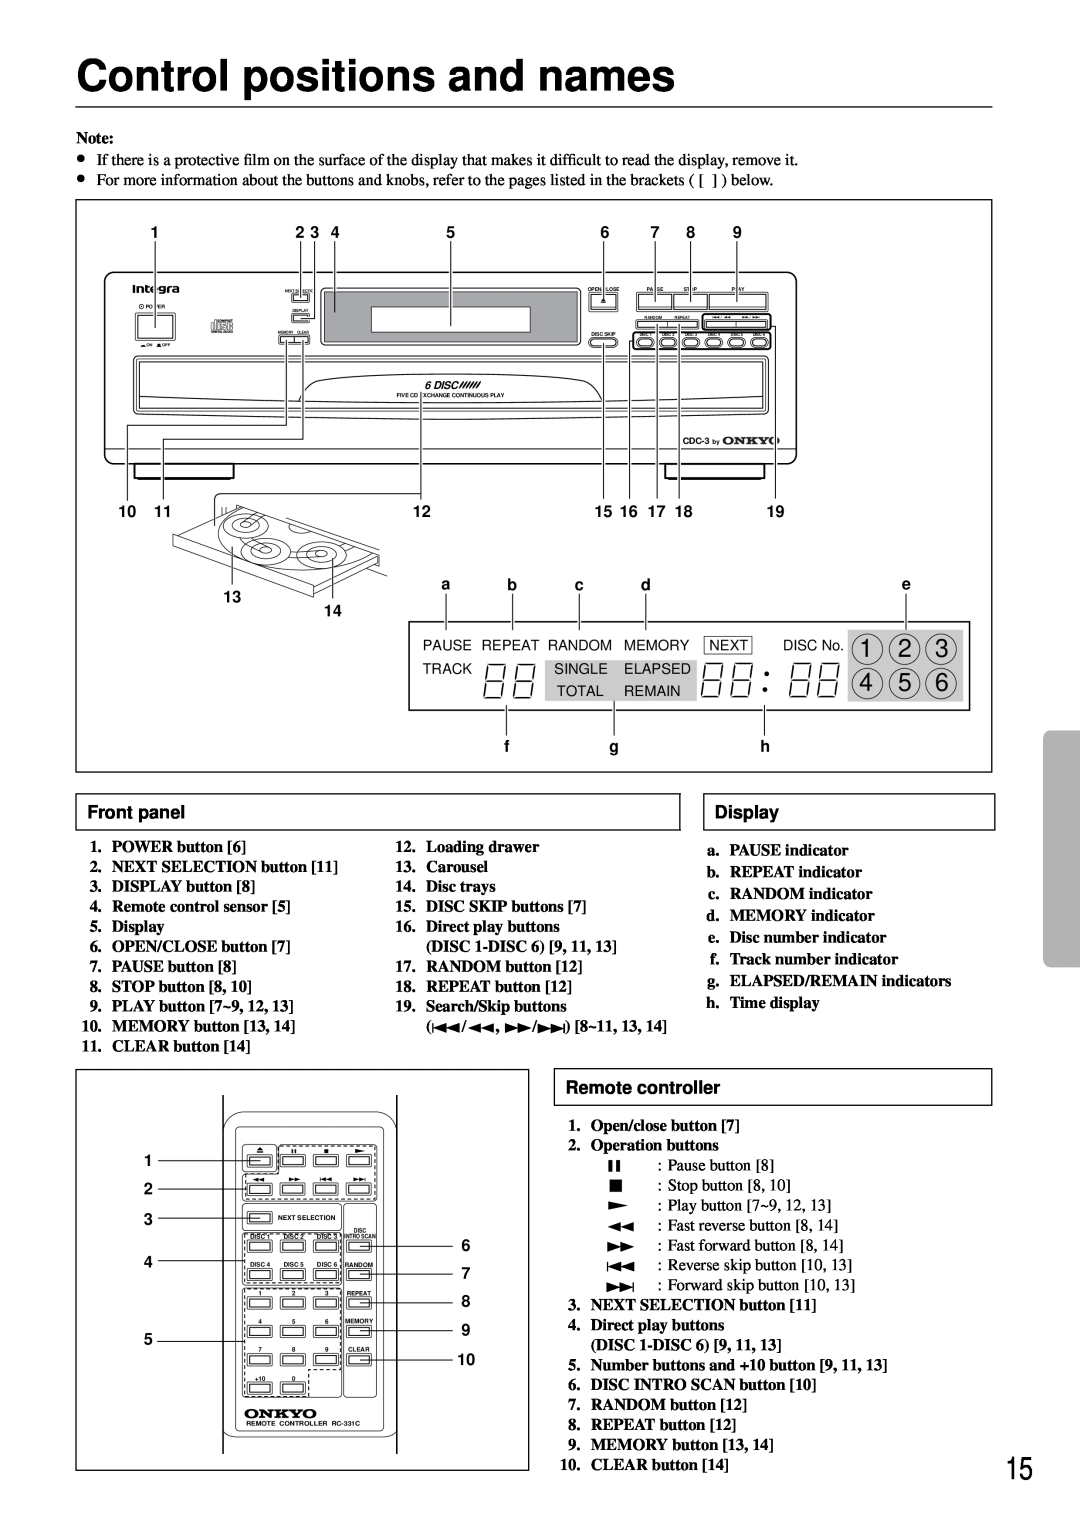 Integra CDC-3.4 appendix Control positions and names, Front panel, Display, Remote controller 